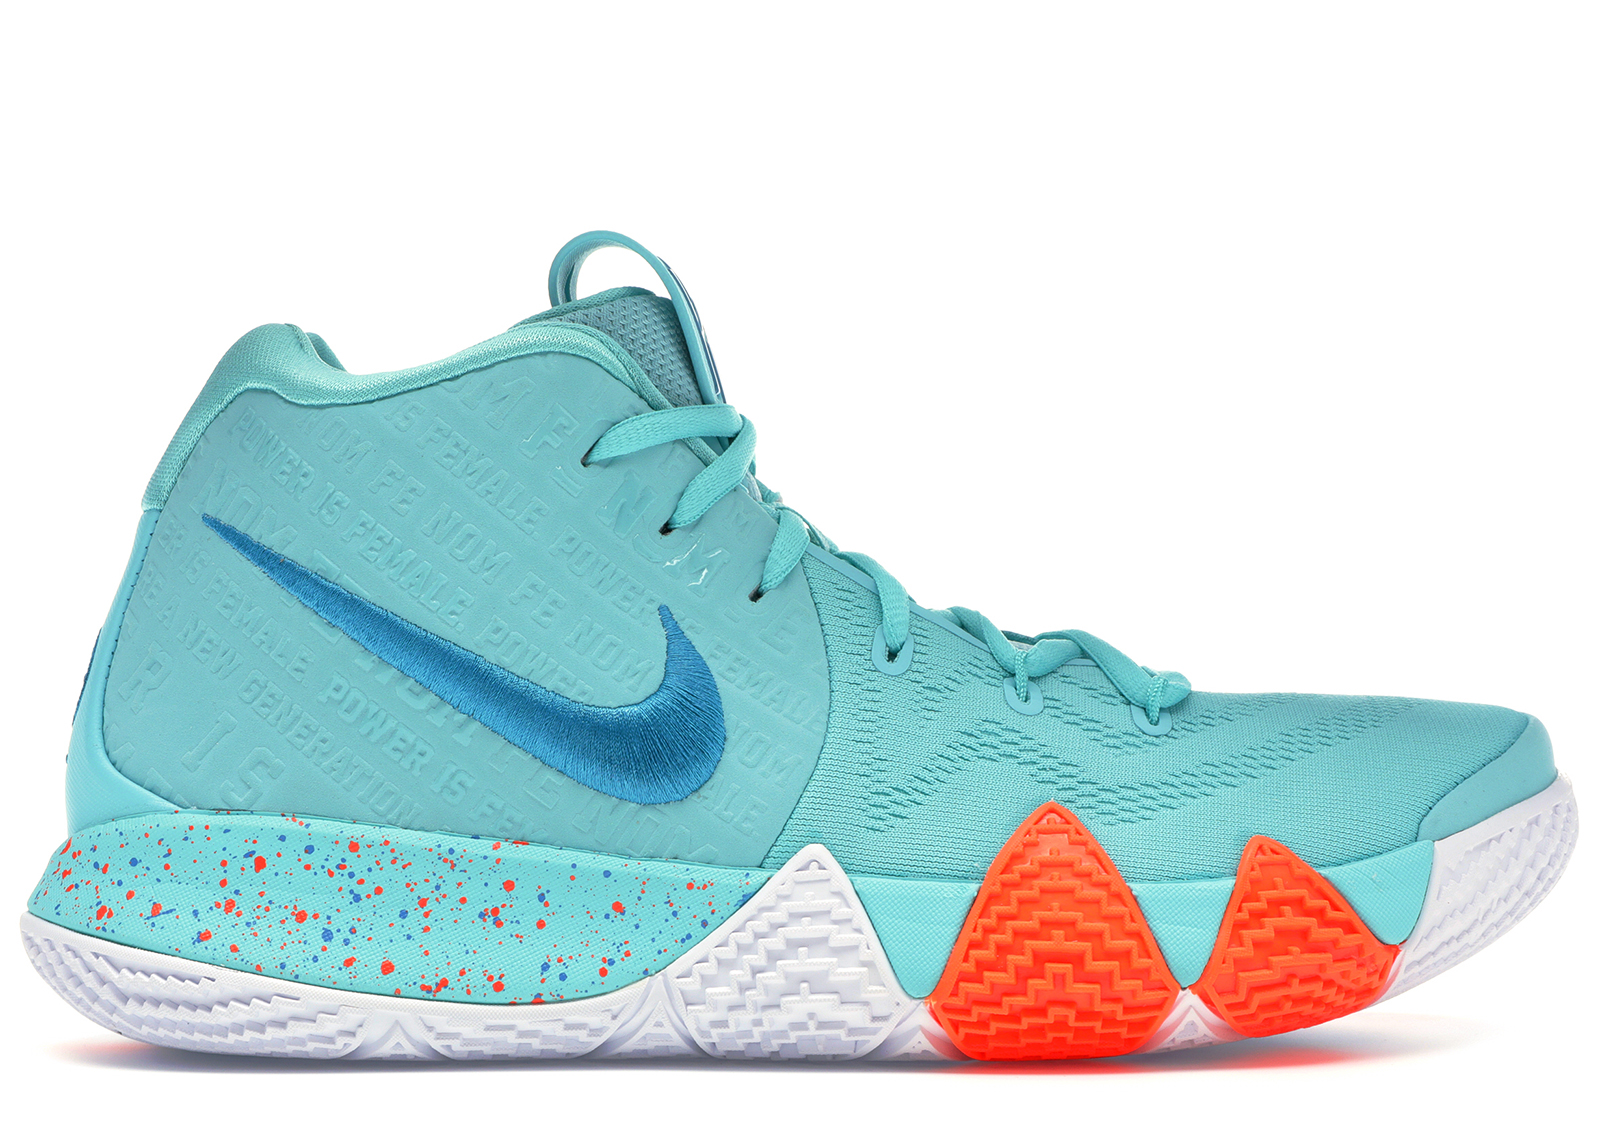 kyrie 4 womens basketball shoes